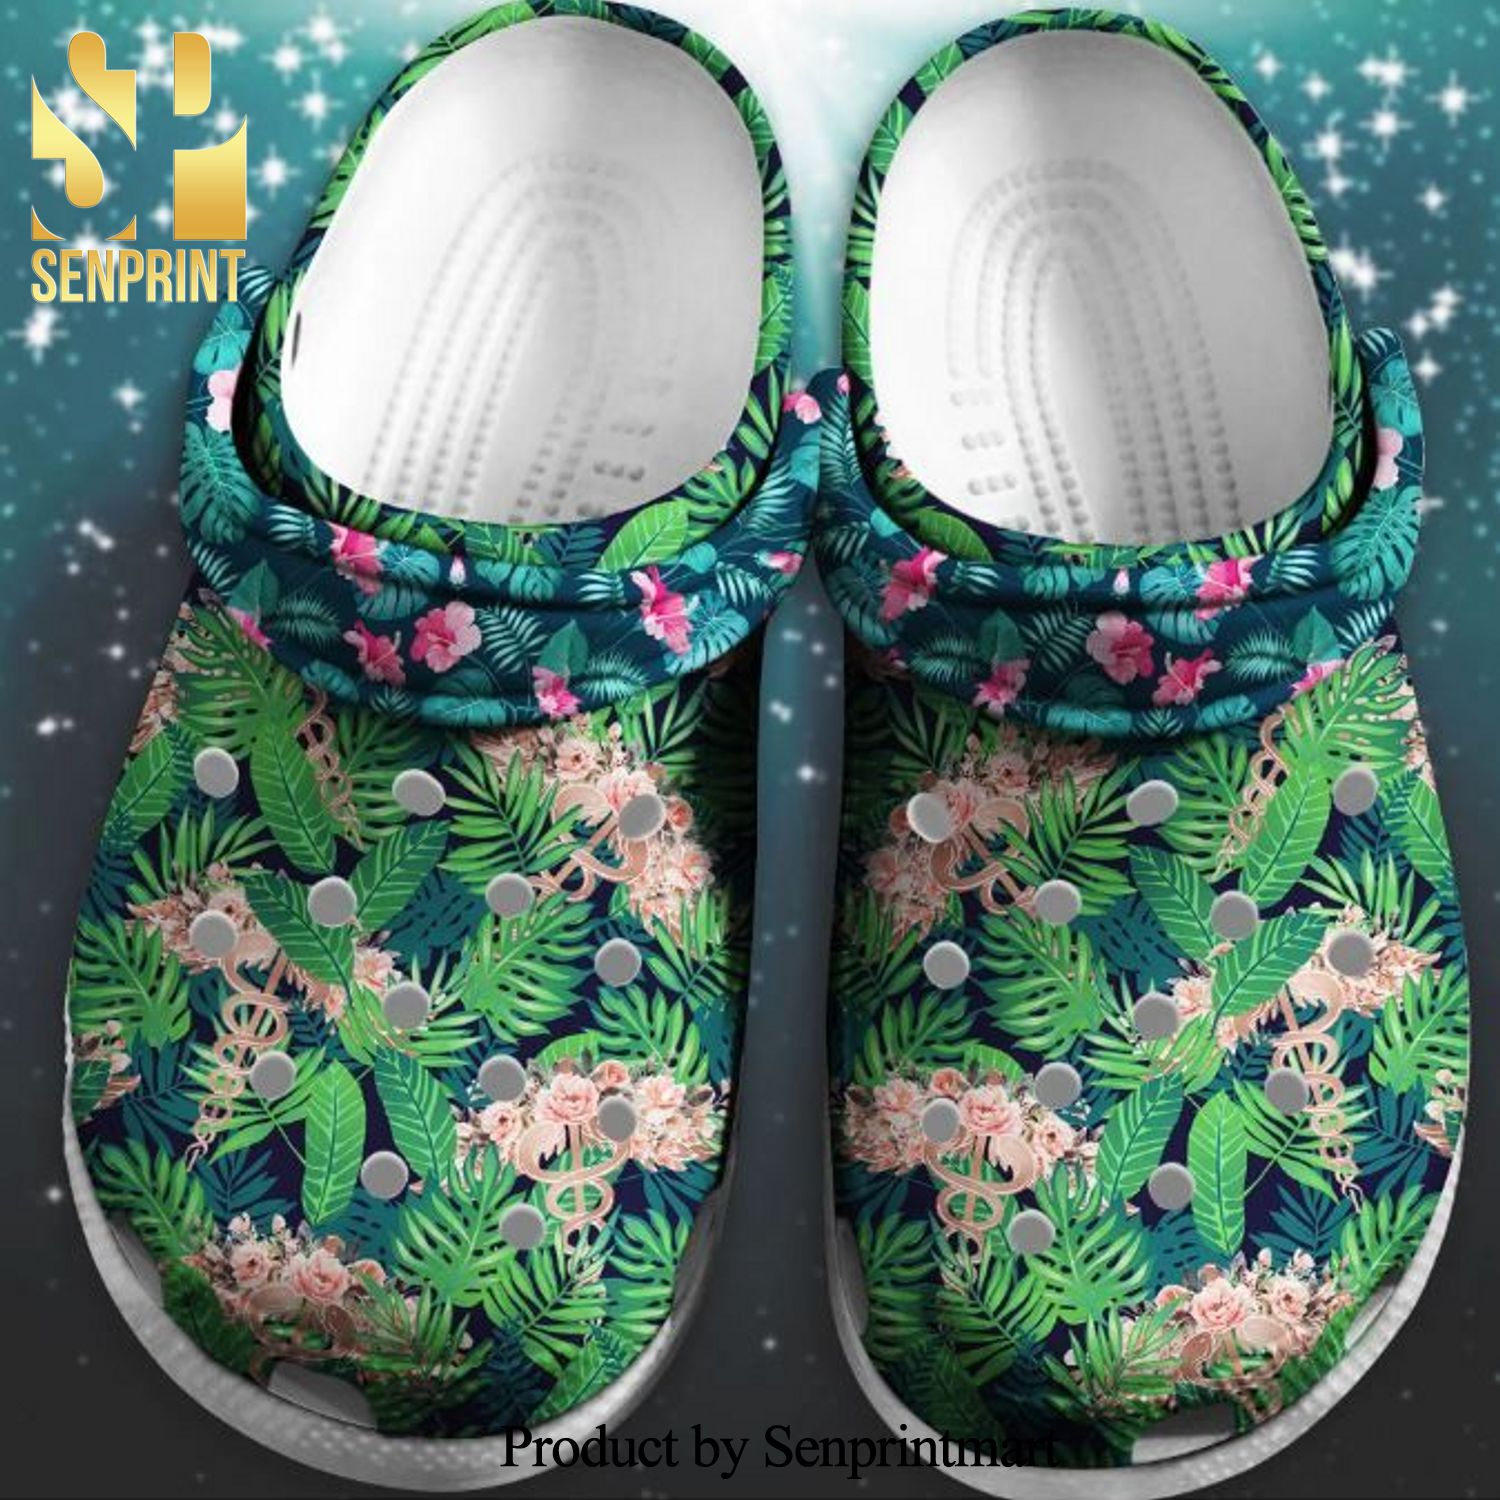 Beautiful Jungle Flower Gift For Lover Rubber Classic Crocs Crocband Clog